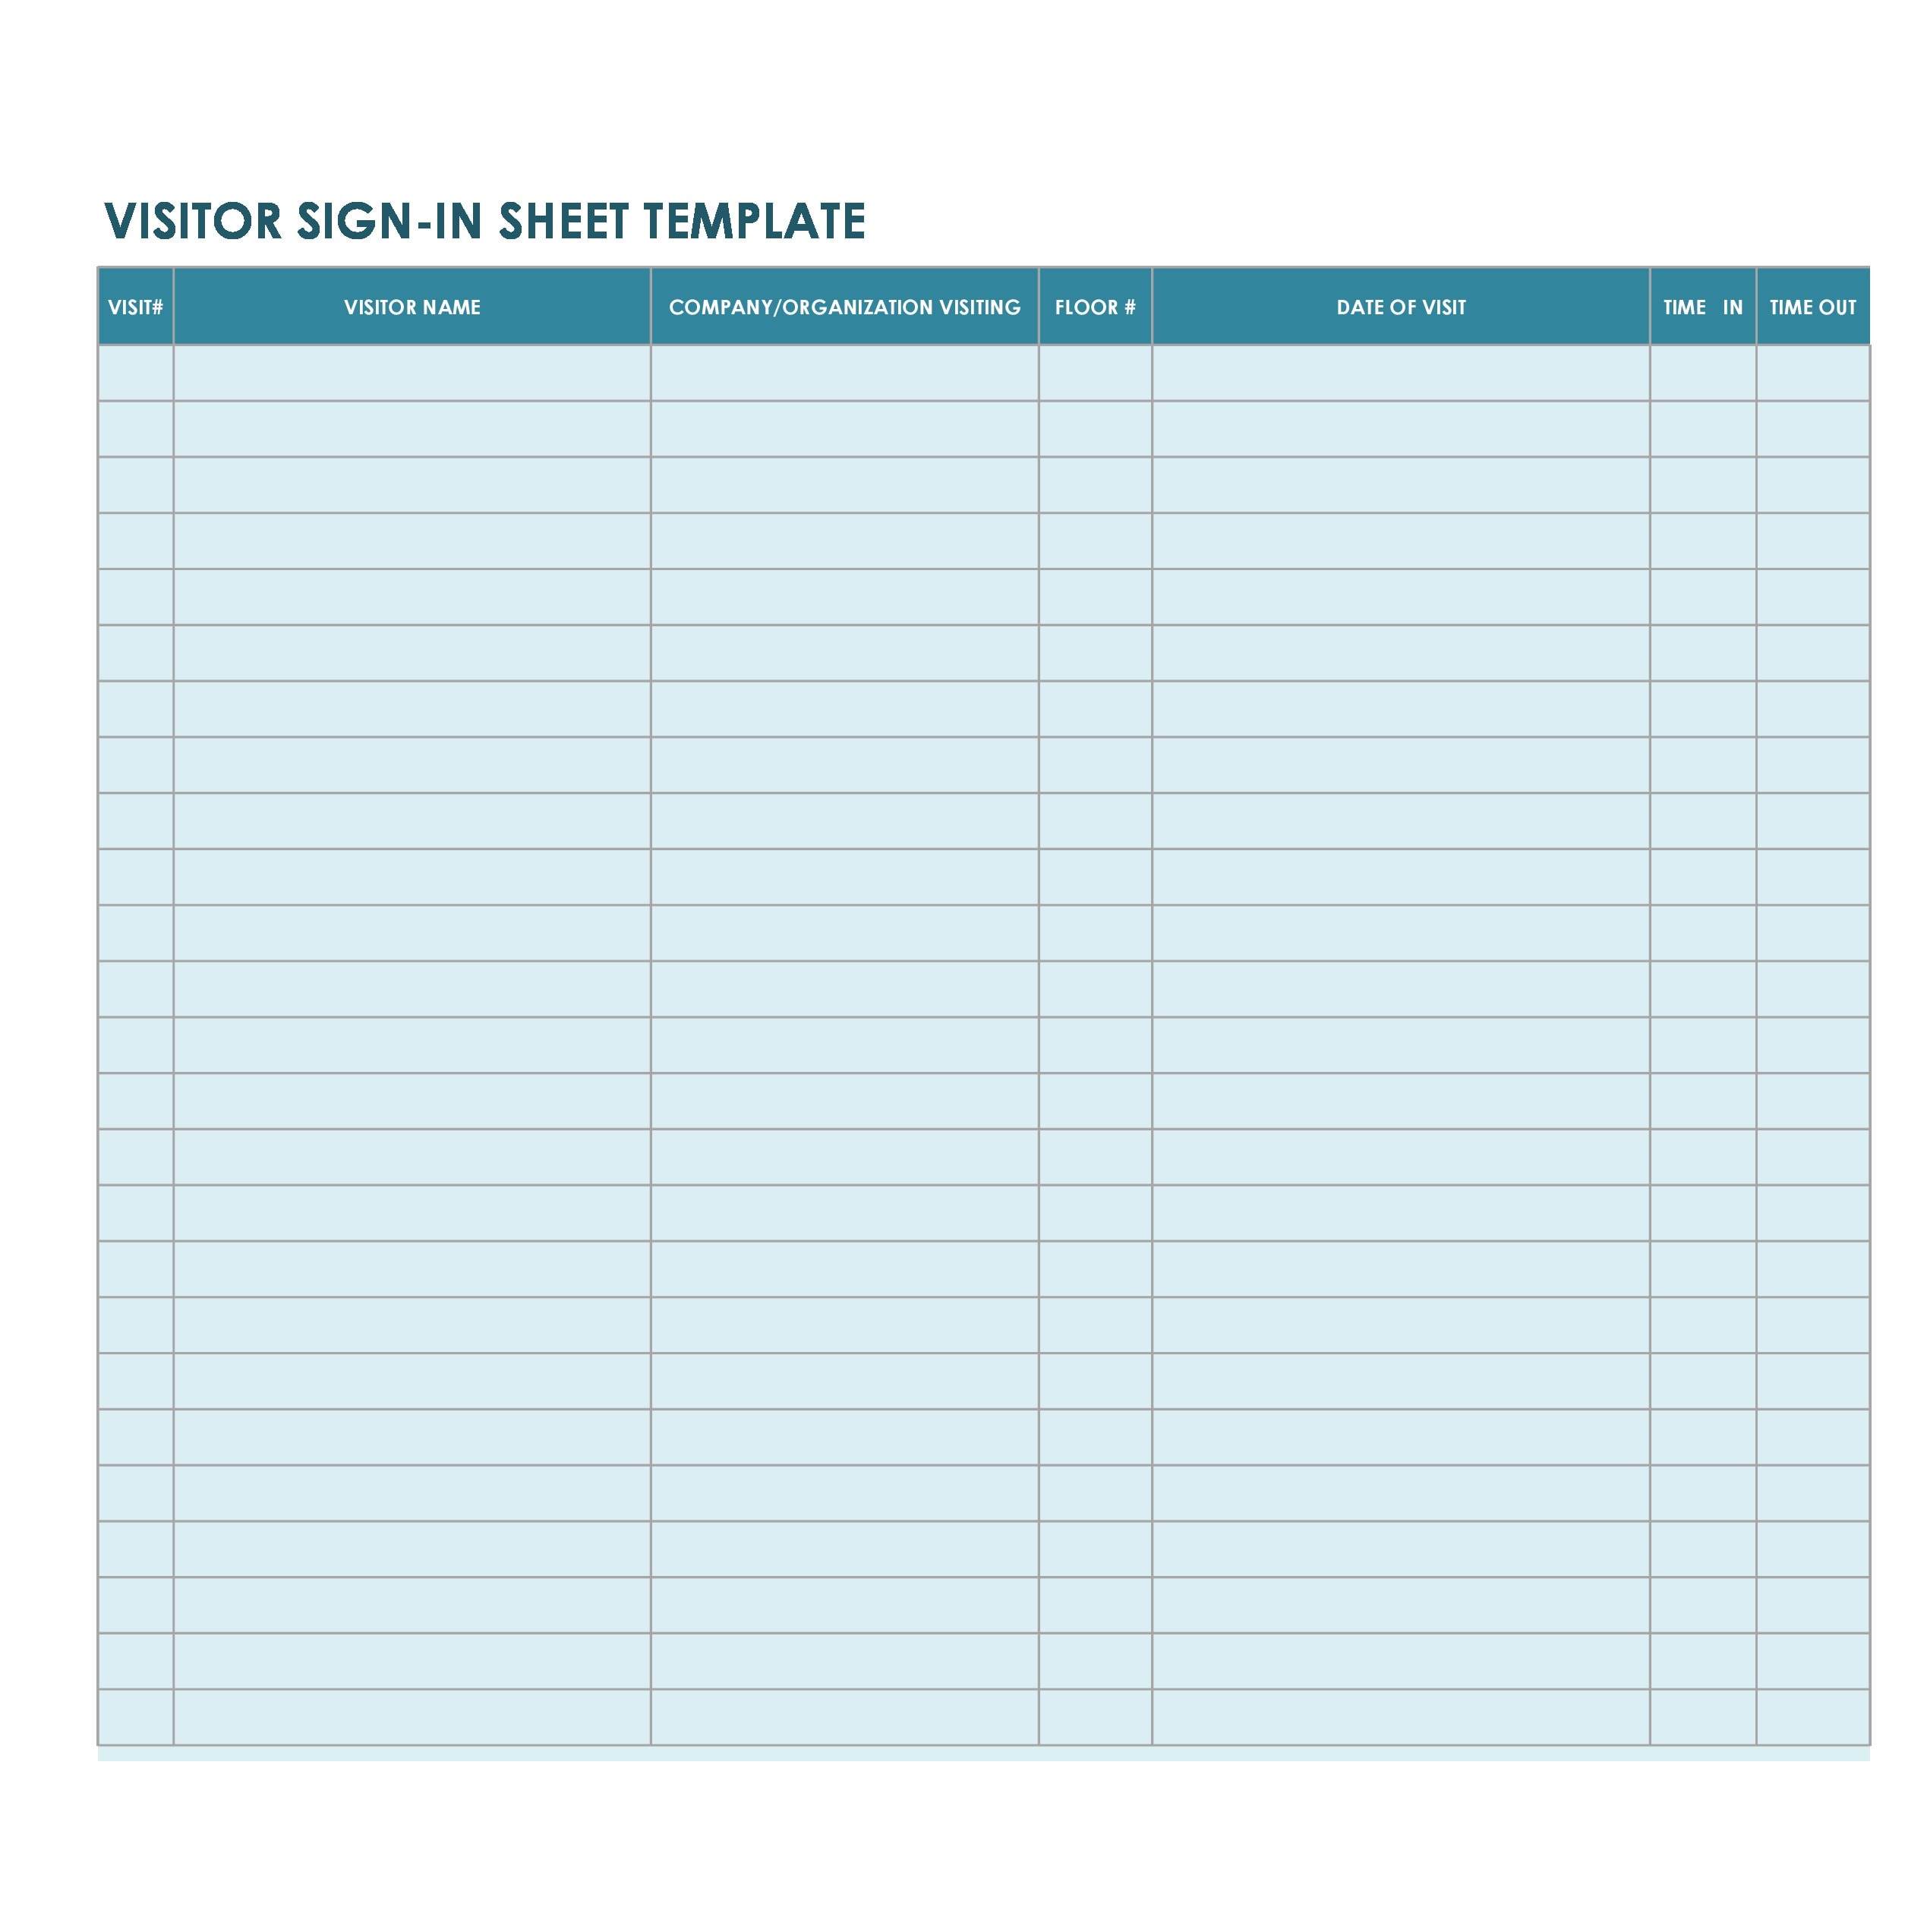 Sign-In Sheet Template from templatearchive.com